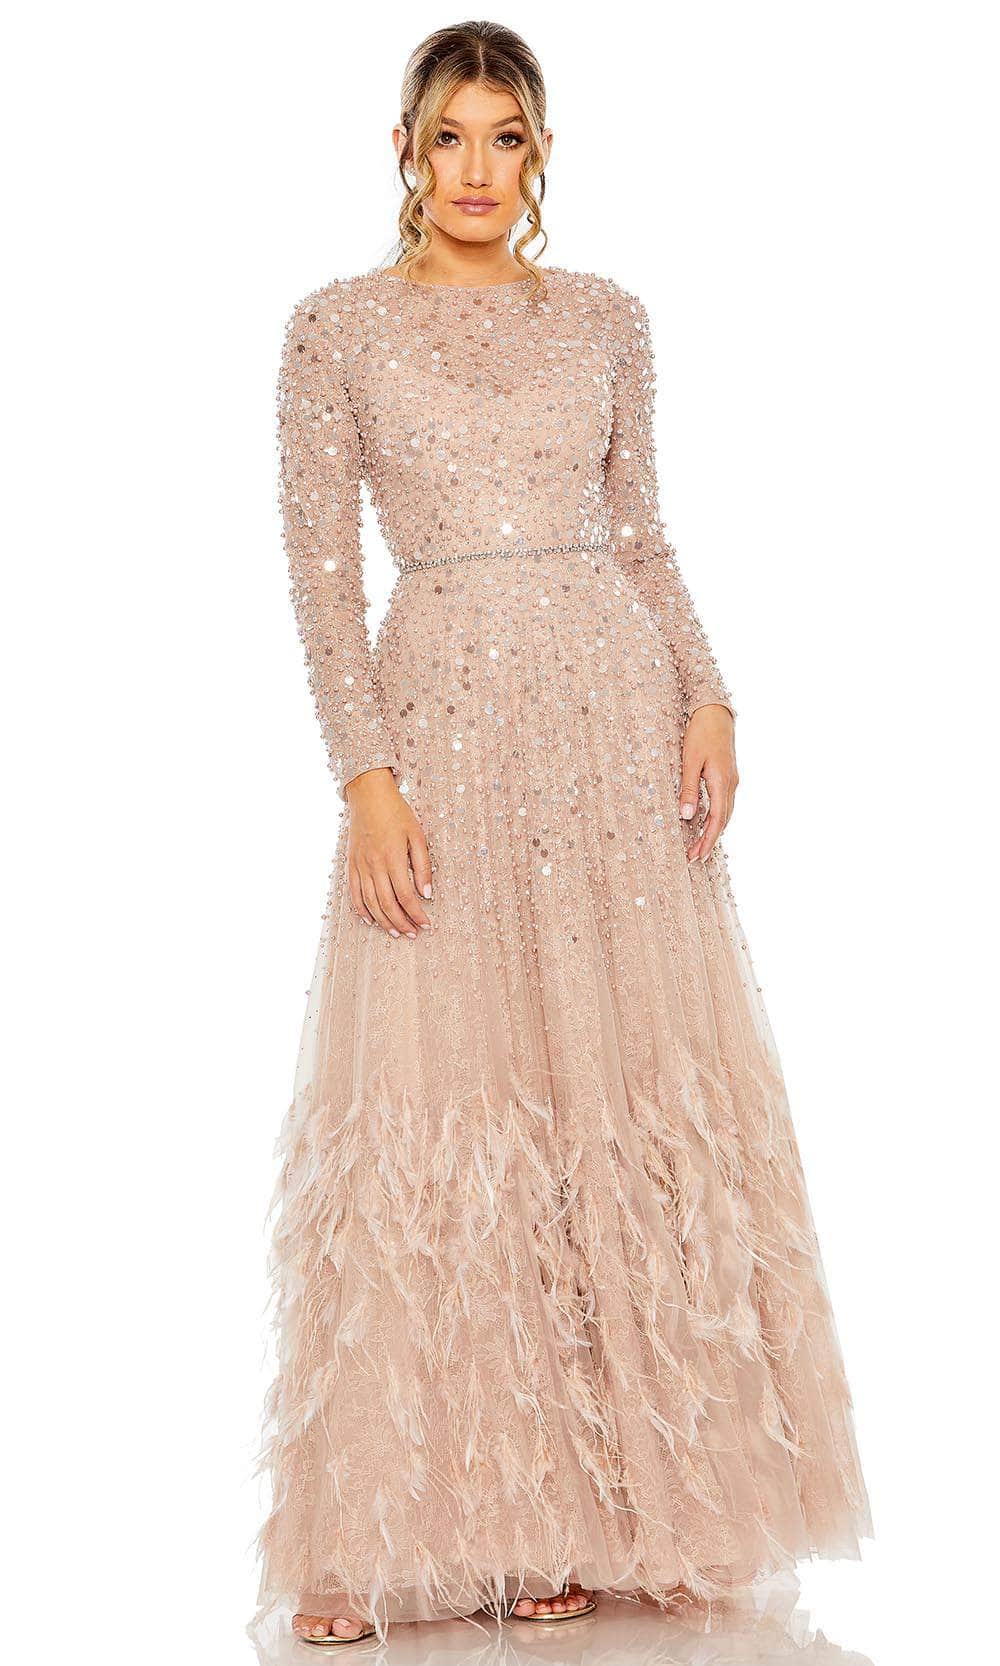 Image of Mac Duggal 11782 - Beaded Feather Fringed A-line Dress